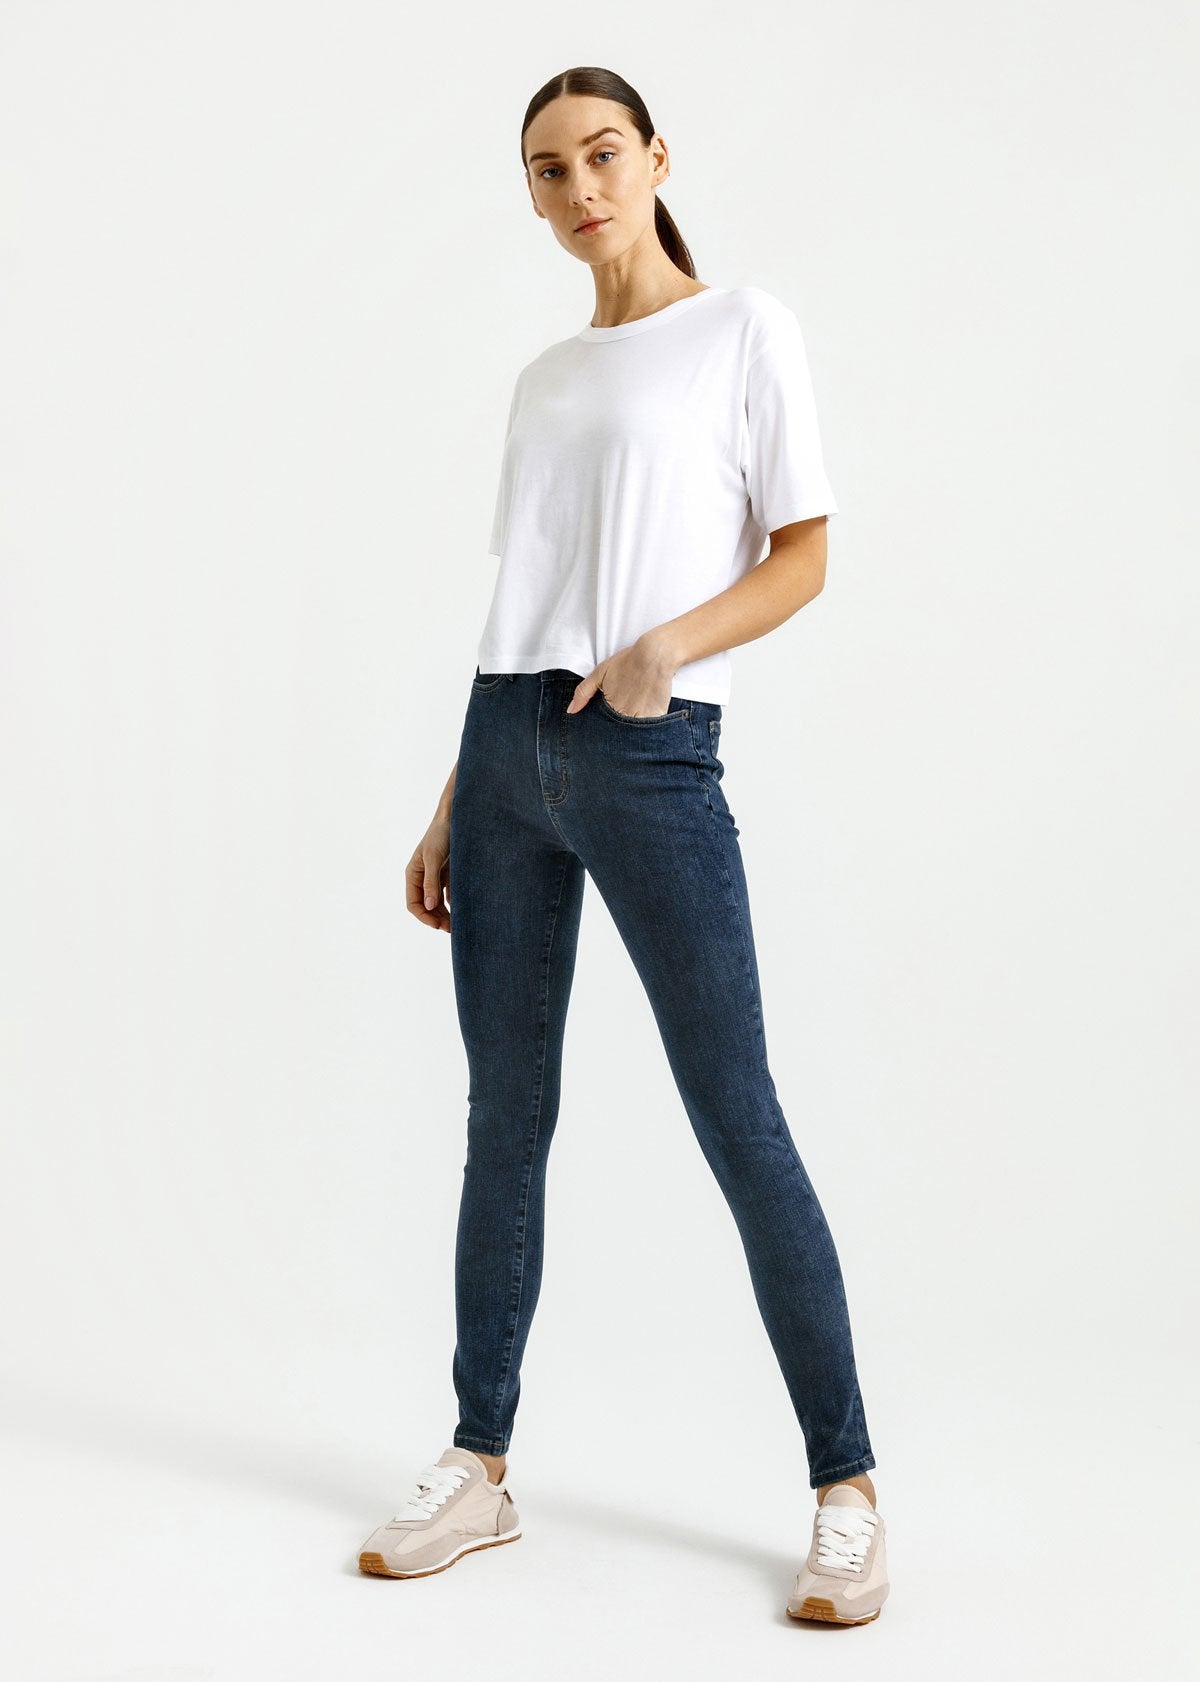 Tale Initiativ tilbage Women's High Rise Skinny Fit Stretch Jeans – DUER